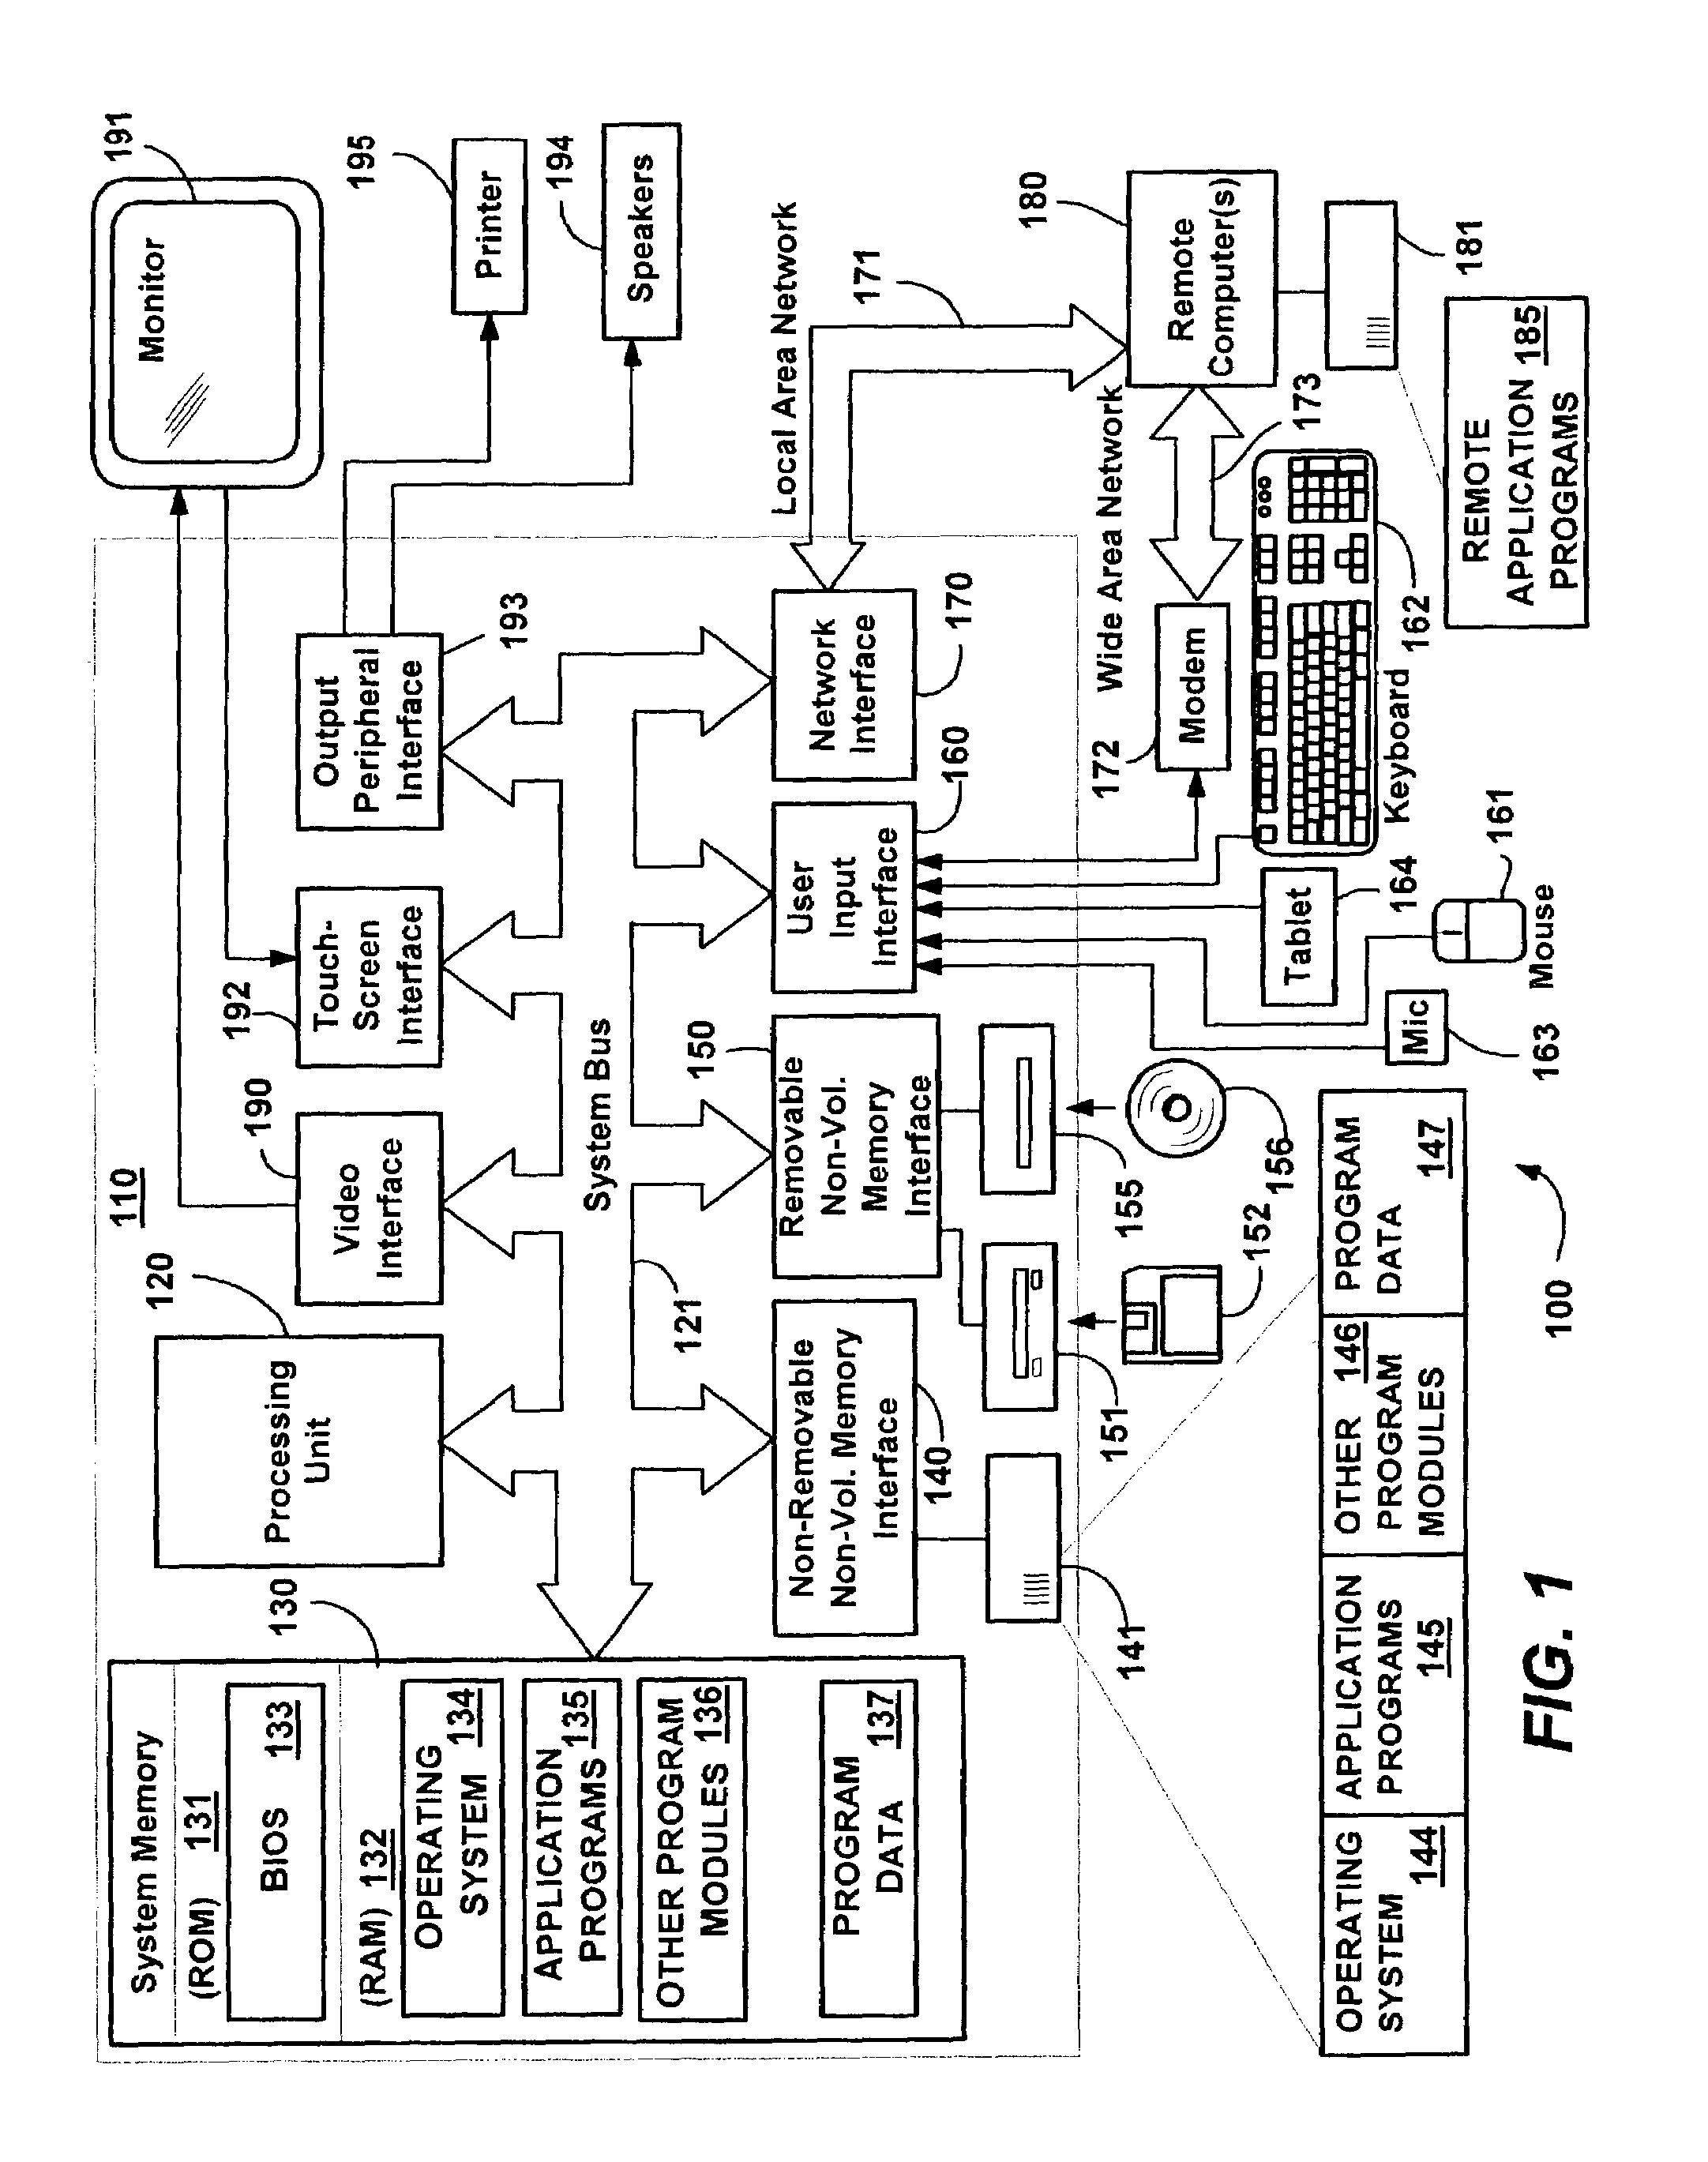 Computer camera system and method for reducing parallax